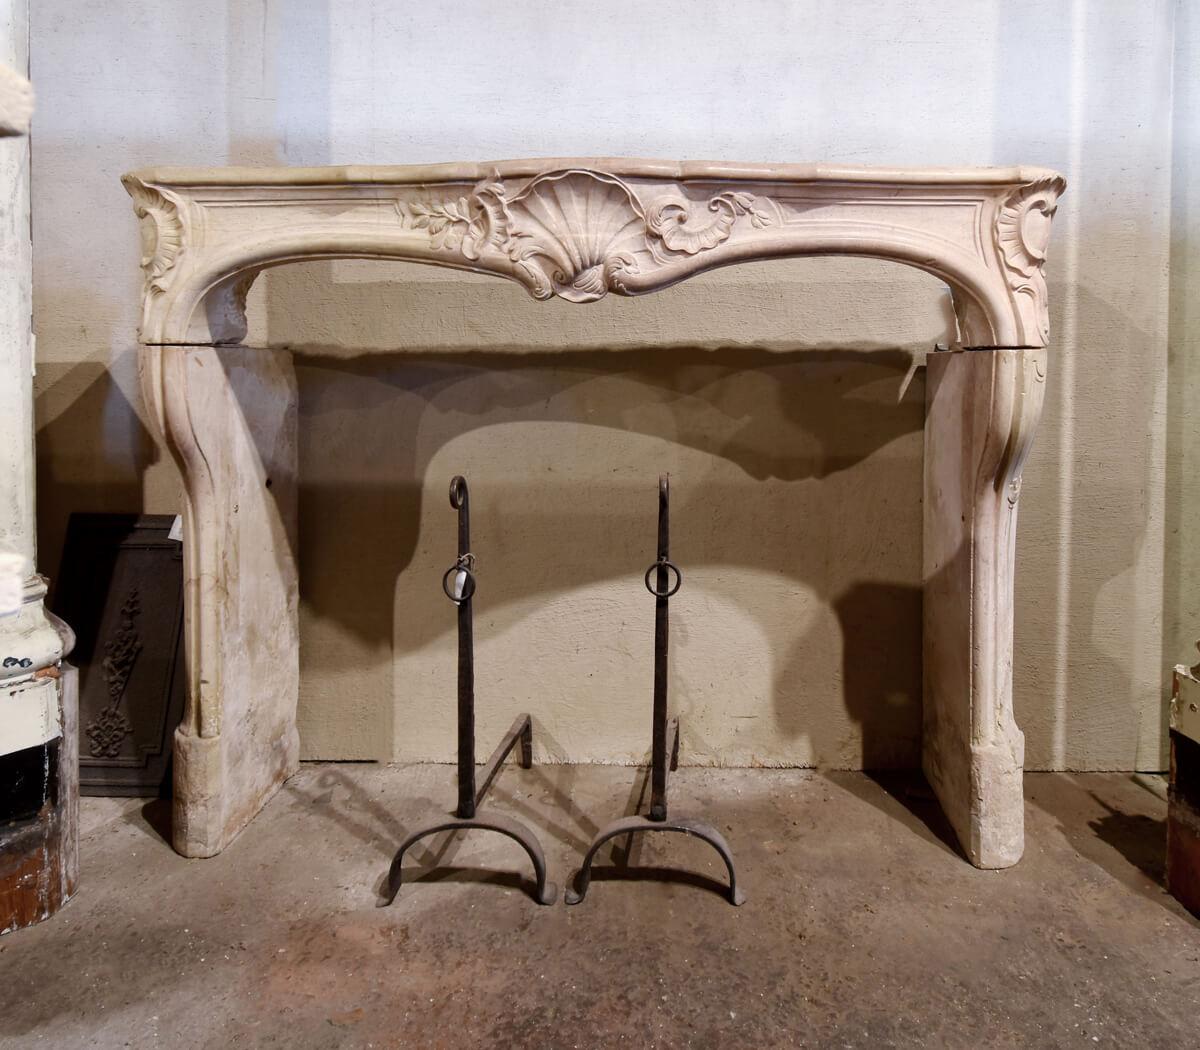 Antique fireplace mantel from the 19th Century to place around the chimney.